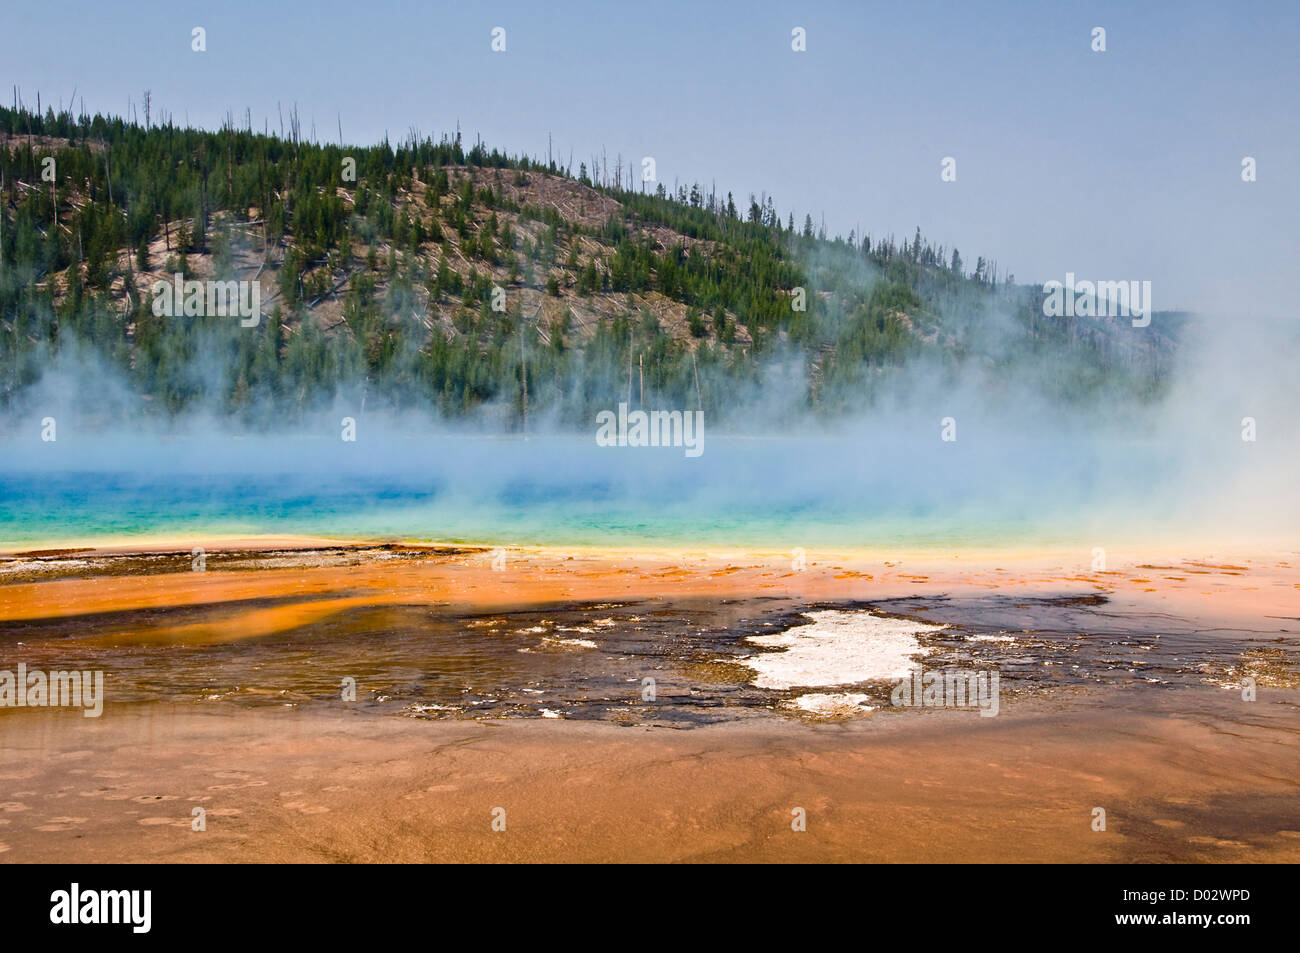 Grand Prismatic Spring - Midway Geyser Basin, parc national de Yellowstone, Wyoming, USA Banque D'Images